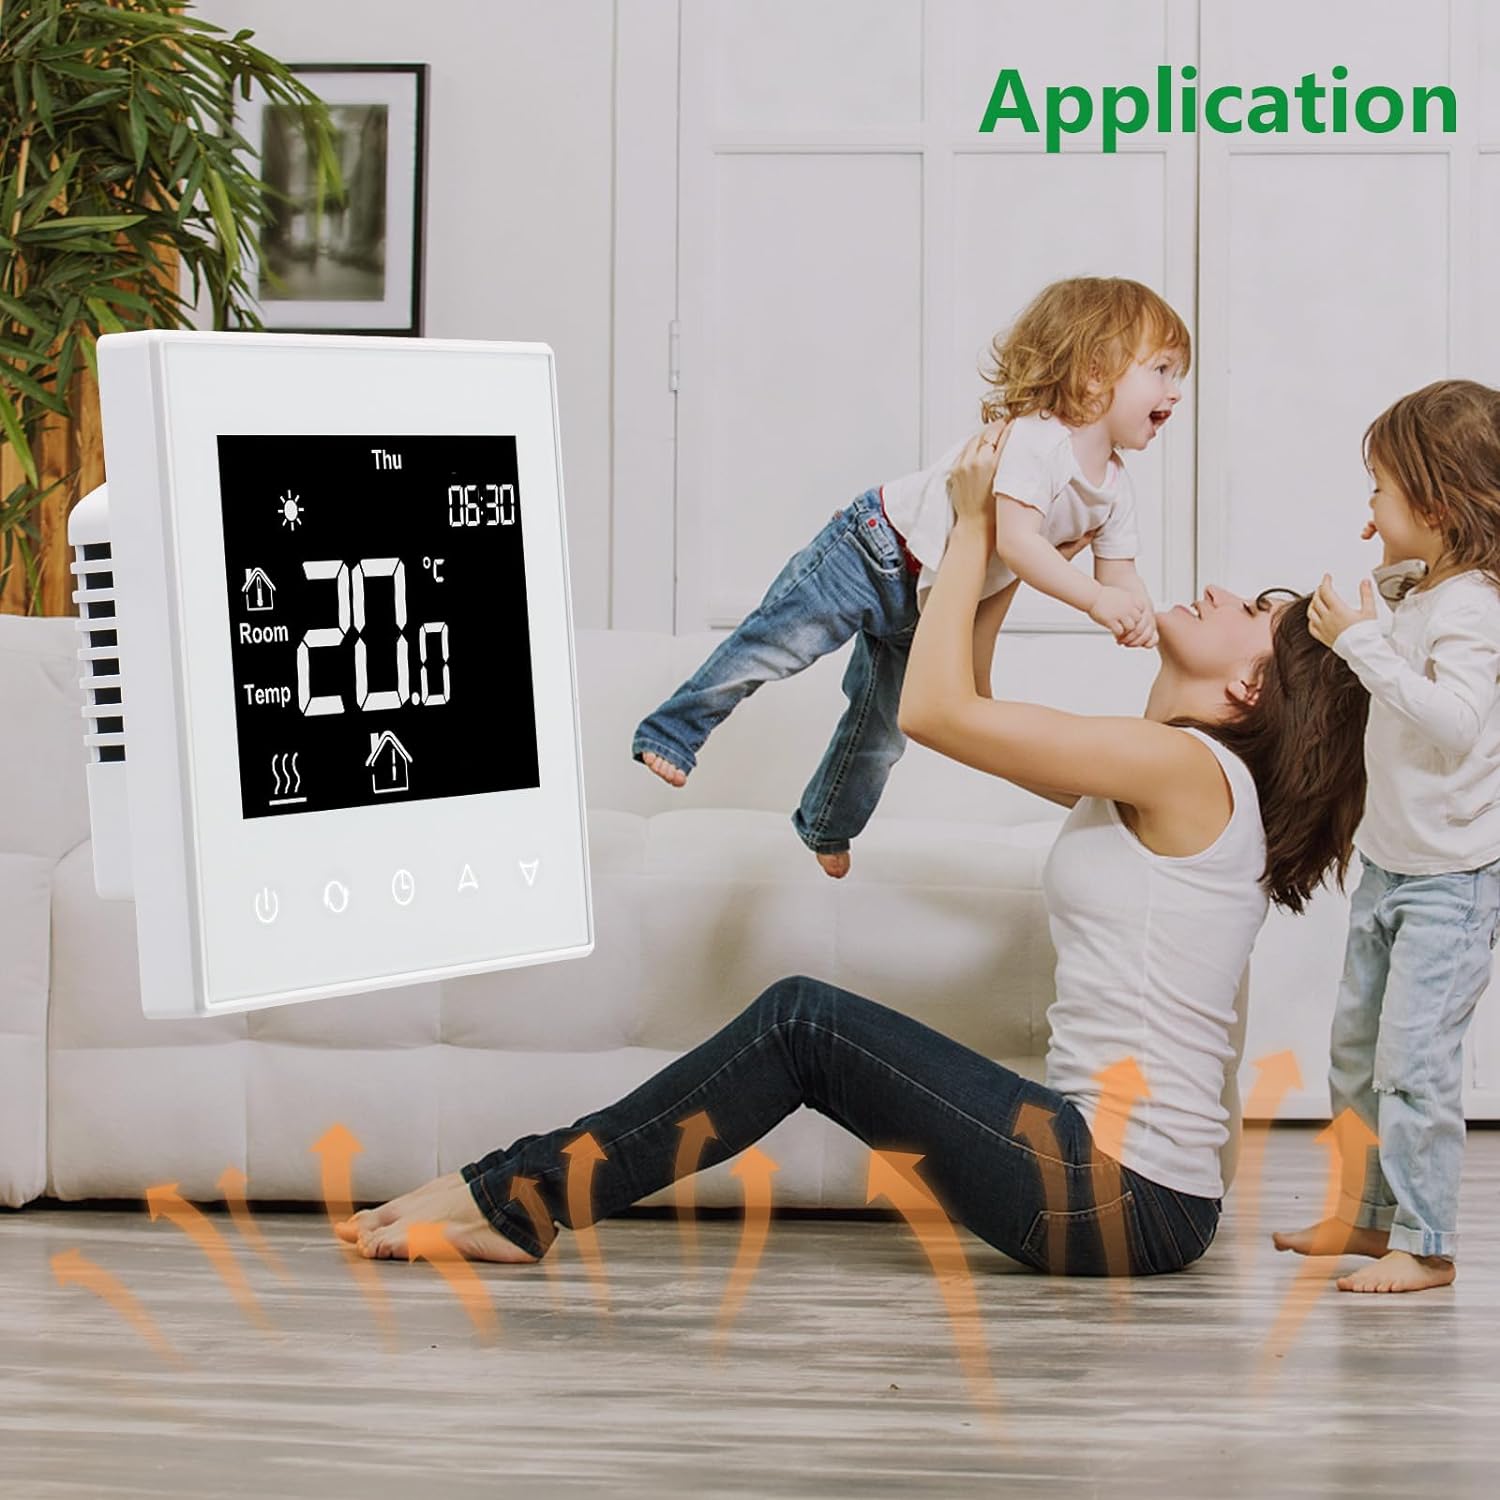 Wengart Underfloor Heating Thermostats Controller 7 - day Programmable with LCD Touch Screen WG505,AC230V 16A for Electric Underfloor Heating with 3m Probe Sensor Black - Amazing Gadgets Outlet